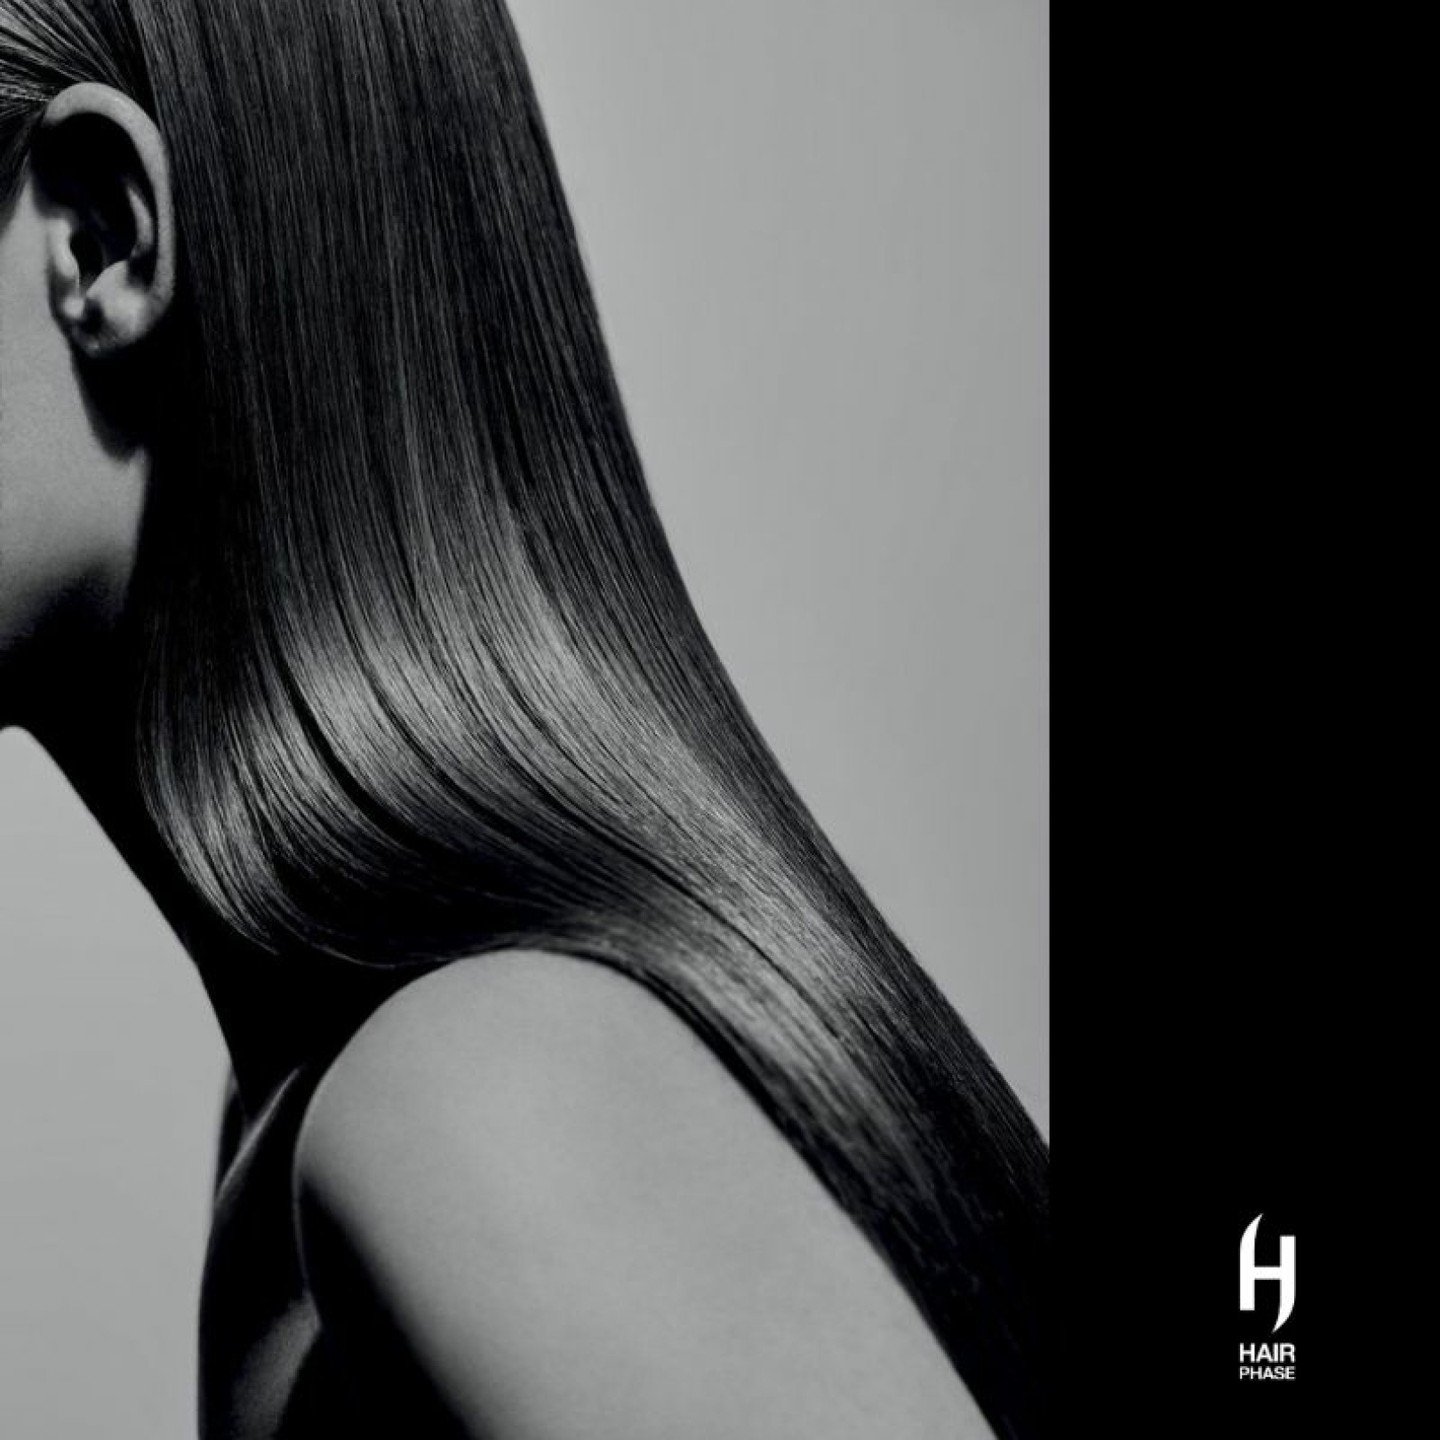 Sleek, healthy hair. We'll give you the tools and tips you need to keep your hair looking great, everyday. Pop in to see how we can help. 

#healthyhair #hair #sanctuarylakes #hairsalon